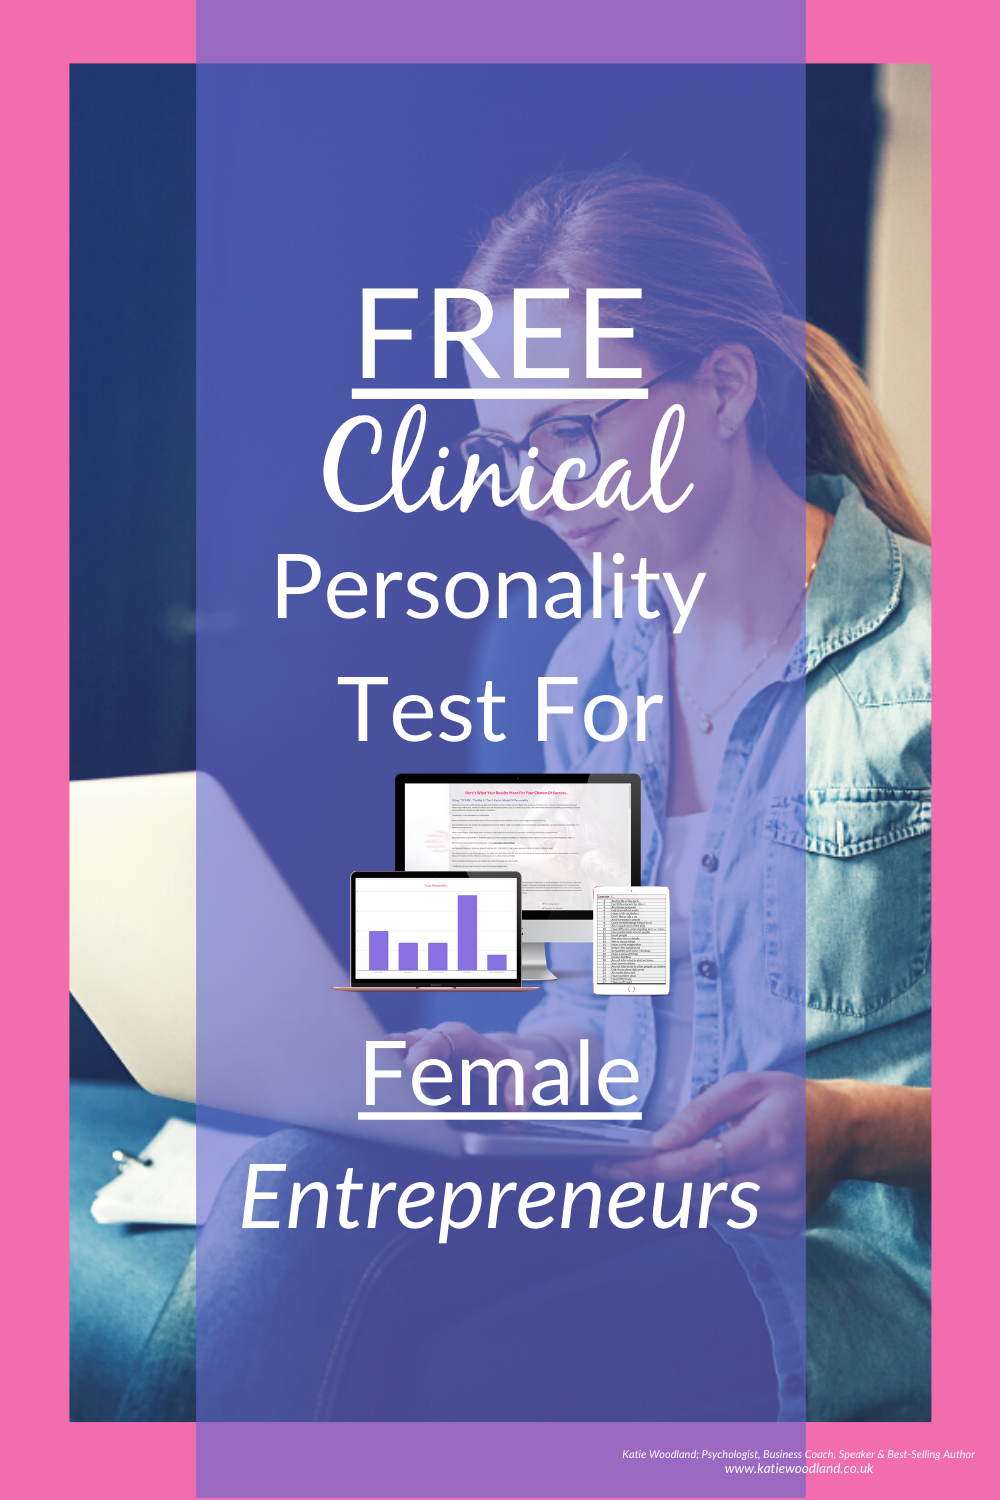 Clinical Personality Test For Female Entrepreneurs